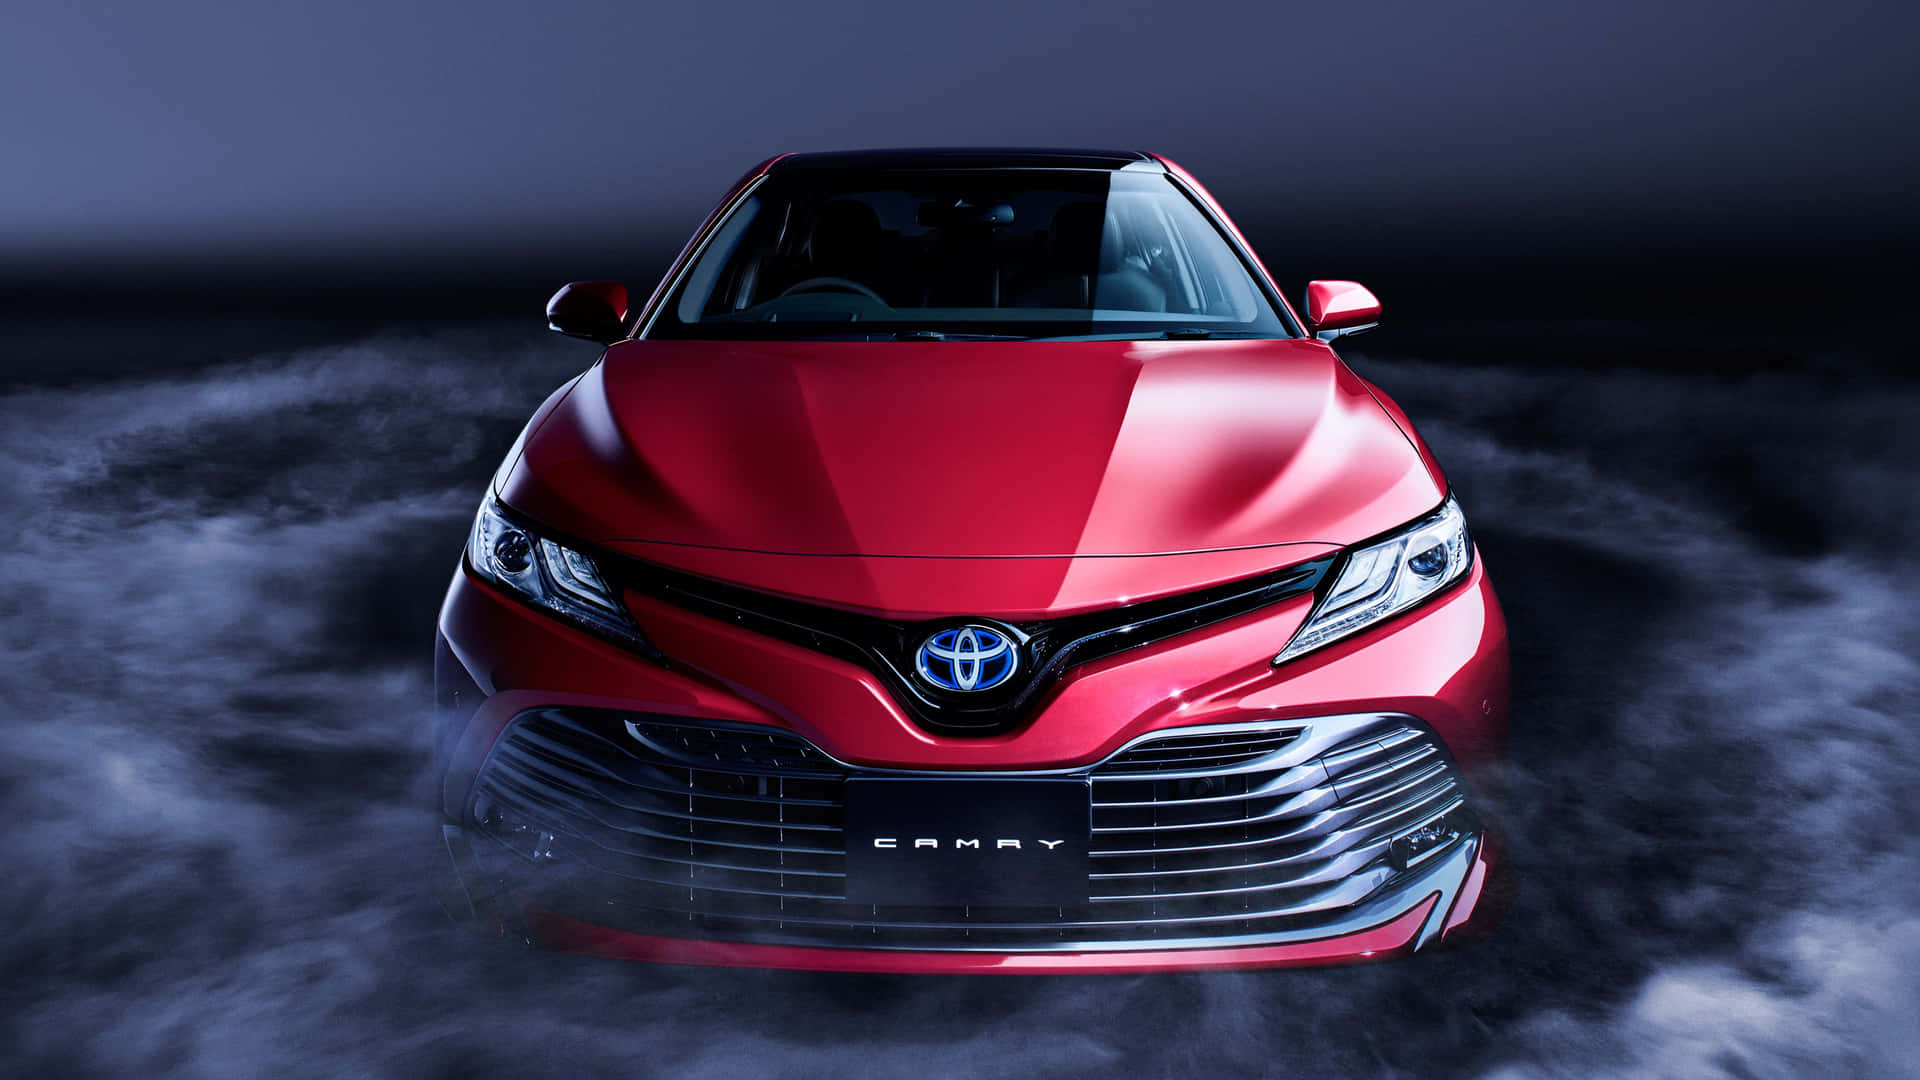 Enjoy the smooth ride of a Toyota